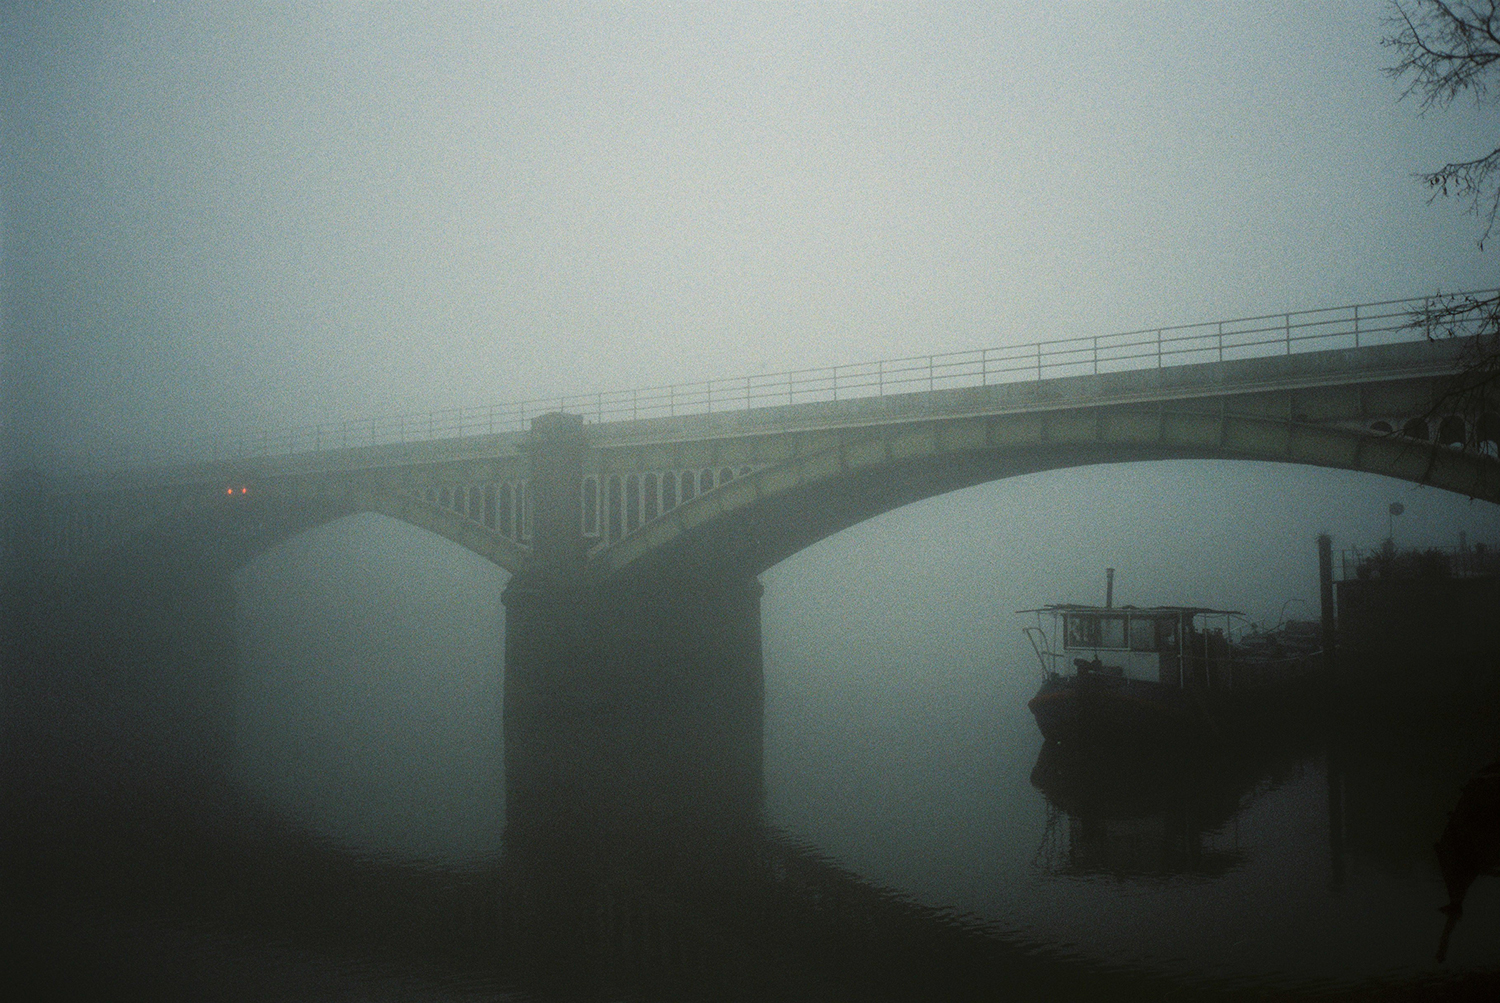  London's Richmond photographed on foggy morning. Taken with a Olympus MjuII camera and Fuji 400H film. By Dmitry Serostanov. 